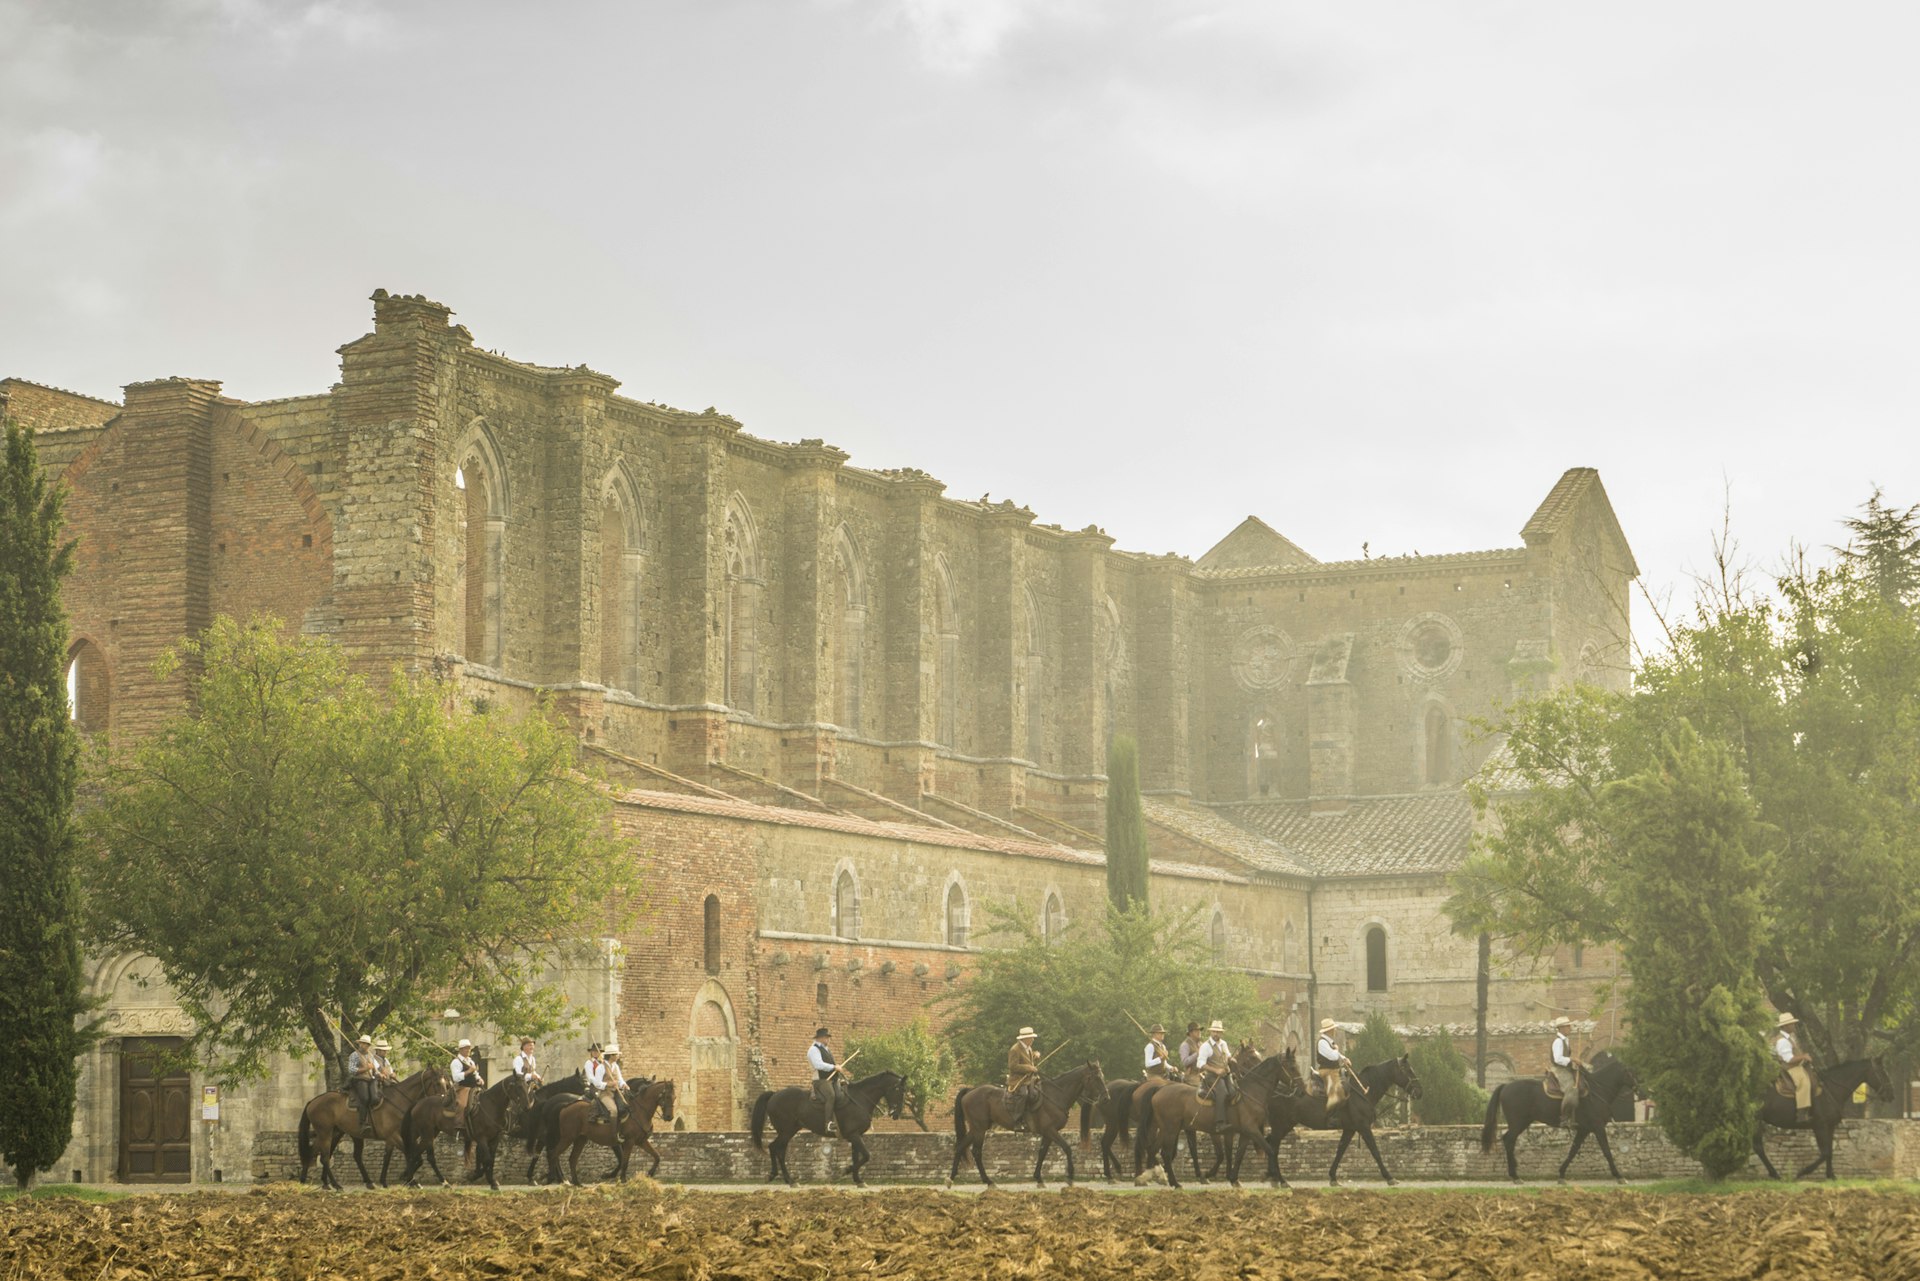 Transumando, an evocation of the ancient tradition of transhumance, traveling on horseback and leading the cattle grazing across the Tuscan countryside